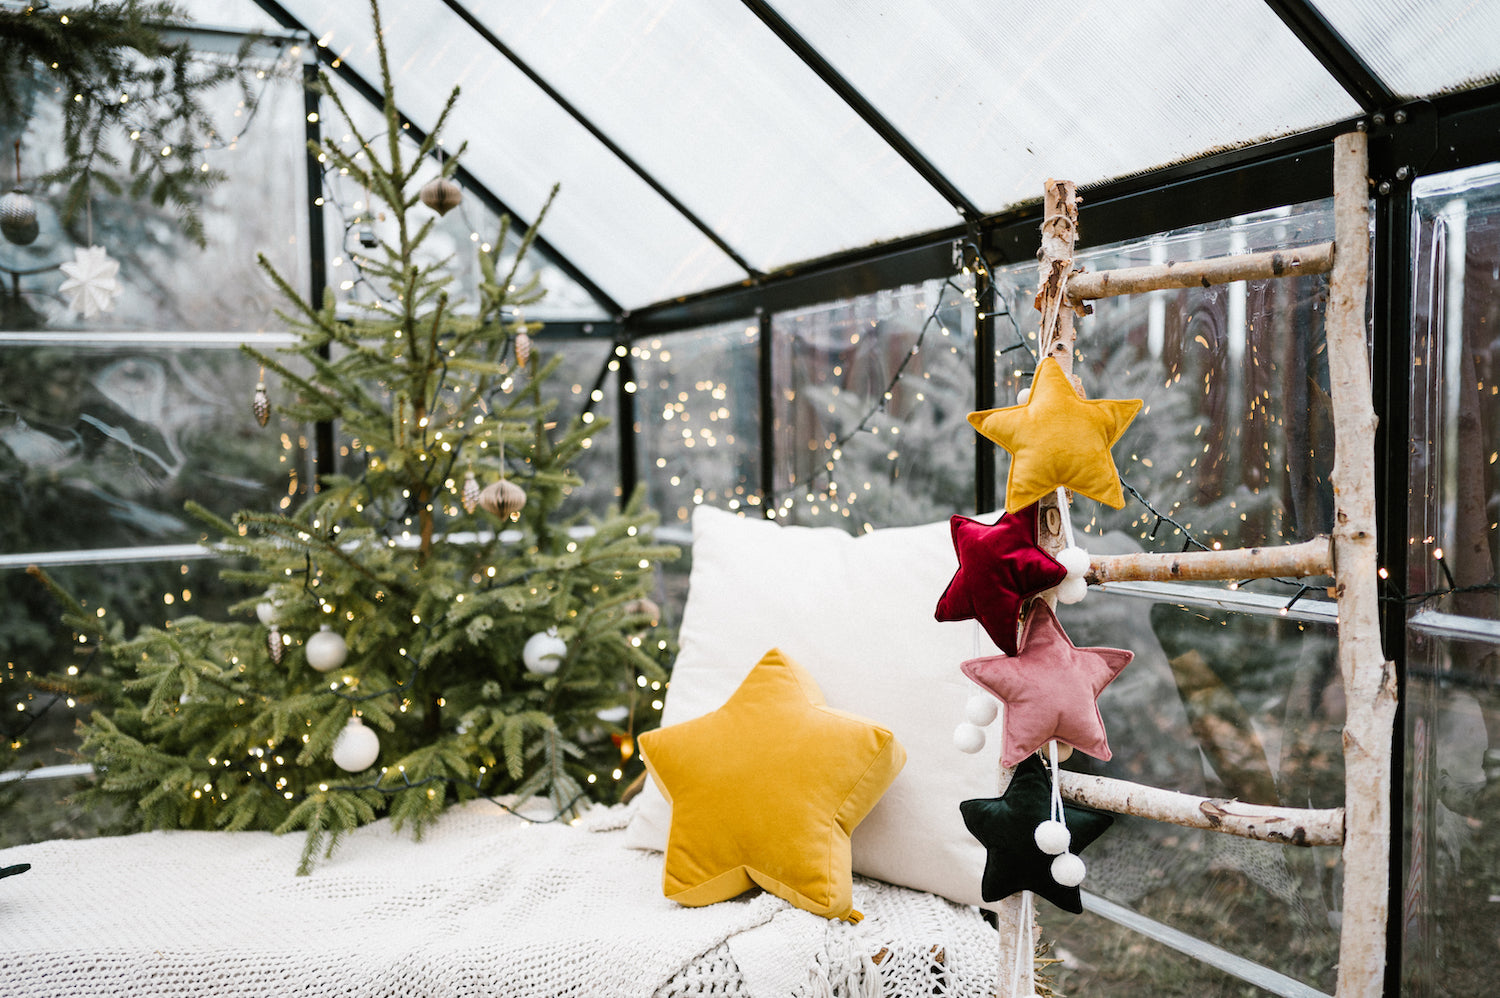 velvet little star pendant yellow with pompoms by bettys home in greenhouse hanging over chair